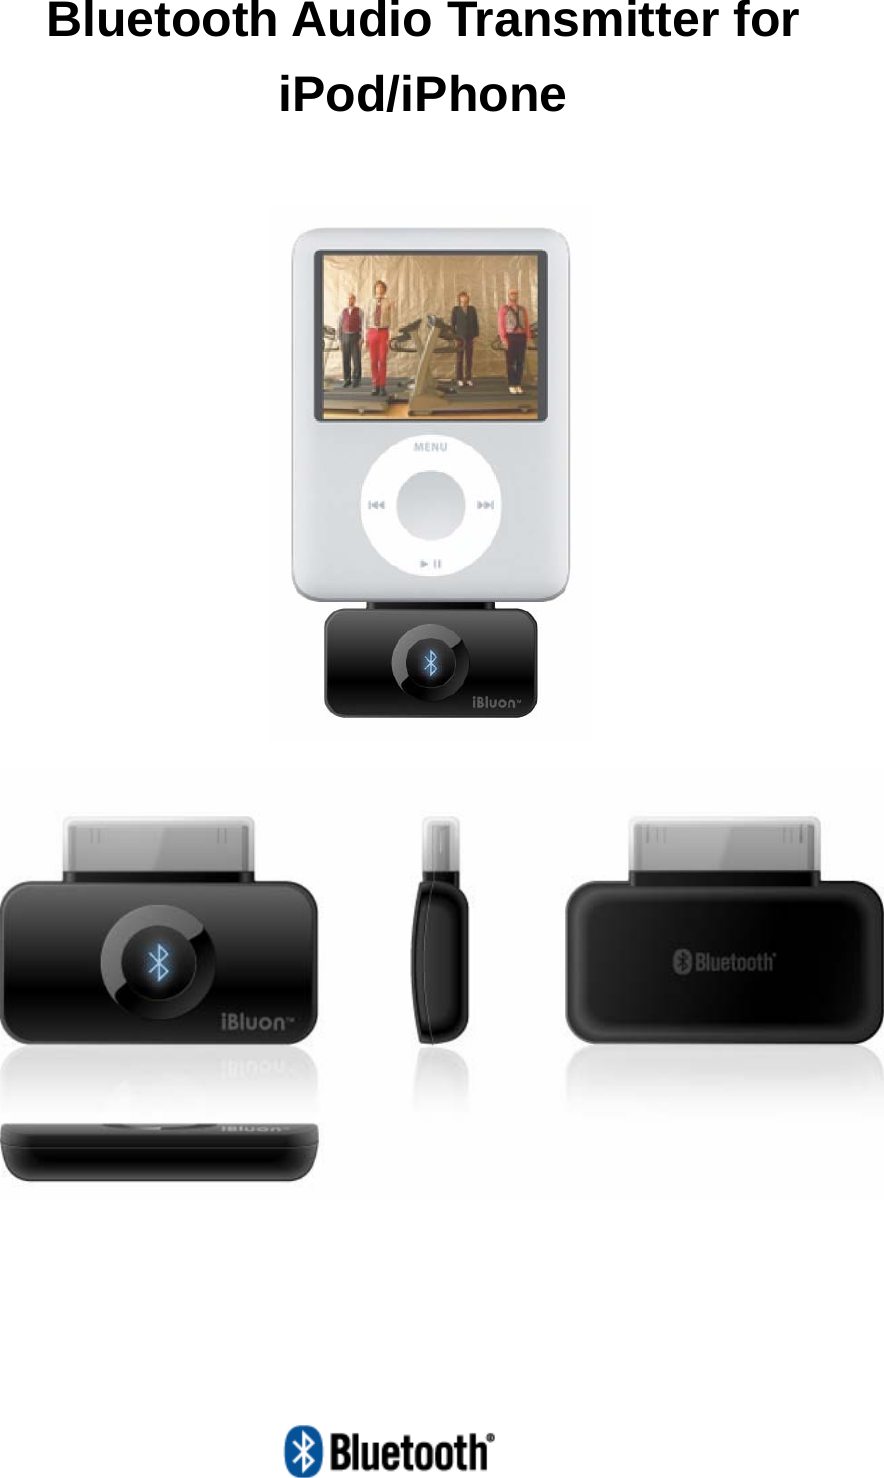   Bluetooth Audio Transmitter for iPod/iPhone                 